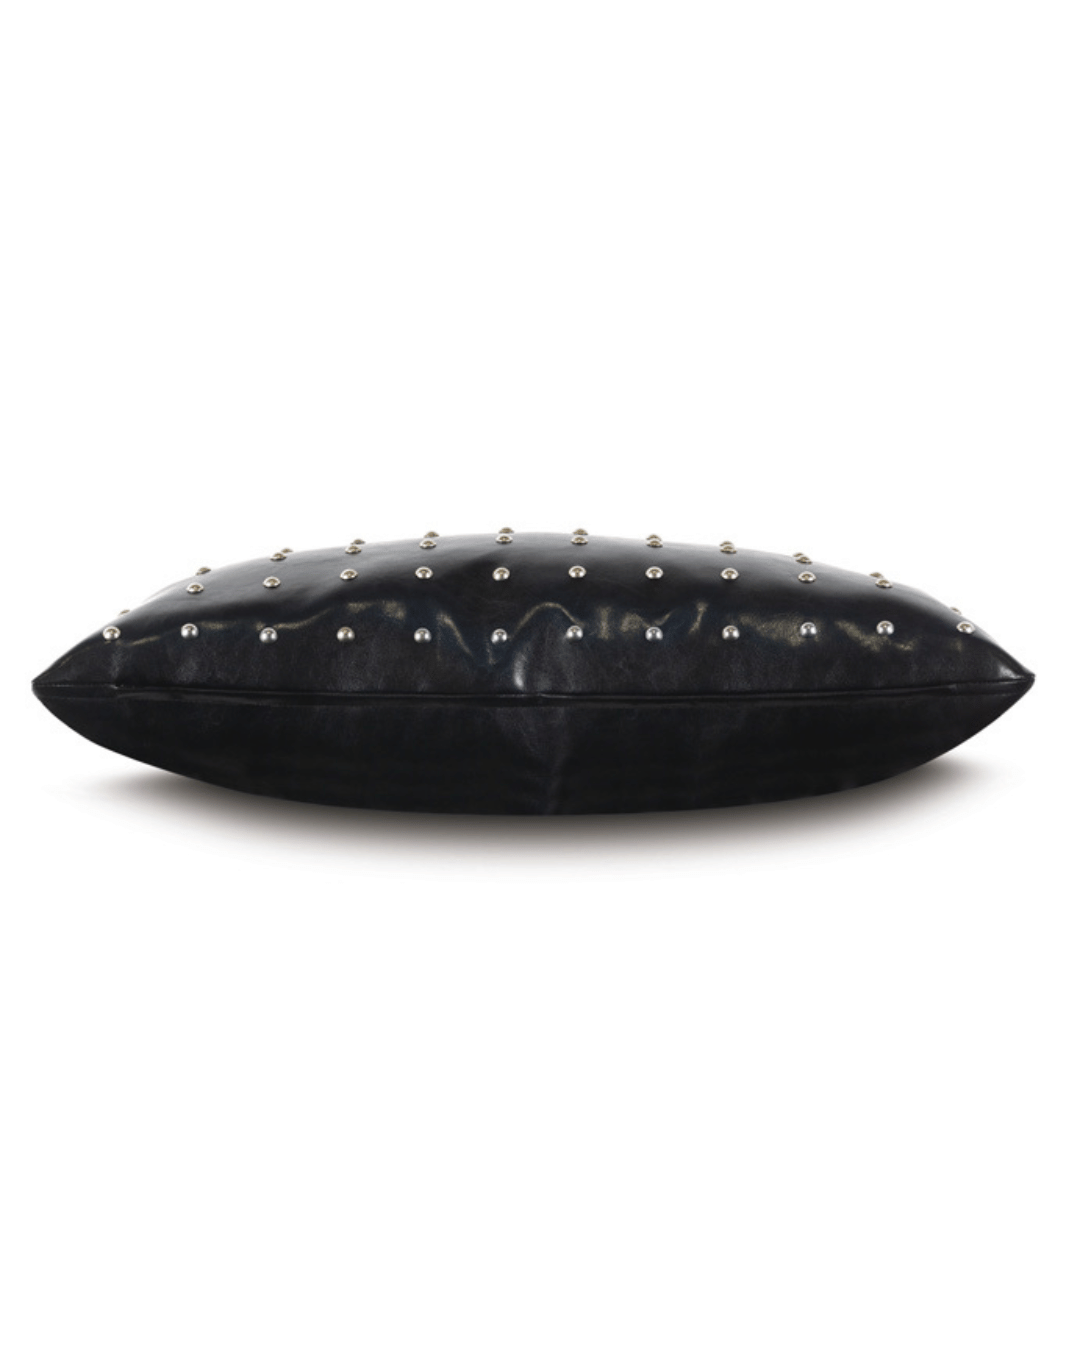 A black rectangular ONYX W/NAILHEADS 15x26 accent pillow from Eastern Accents with a shiny faux leather surface, adorned with evenly spaced silver nailhead accents on its top side, shown against a plain white background.